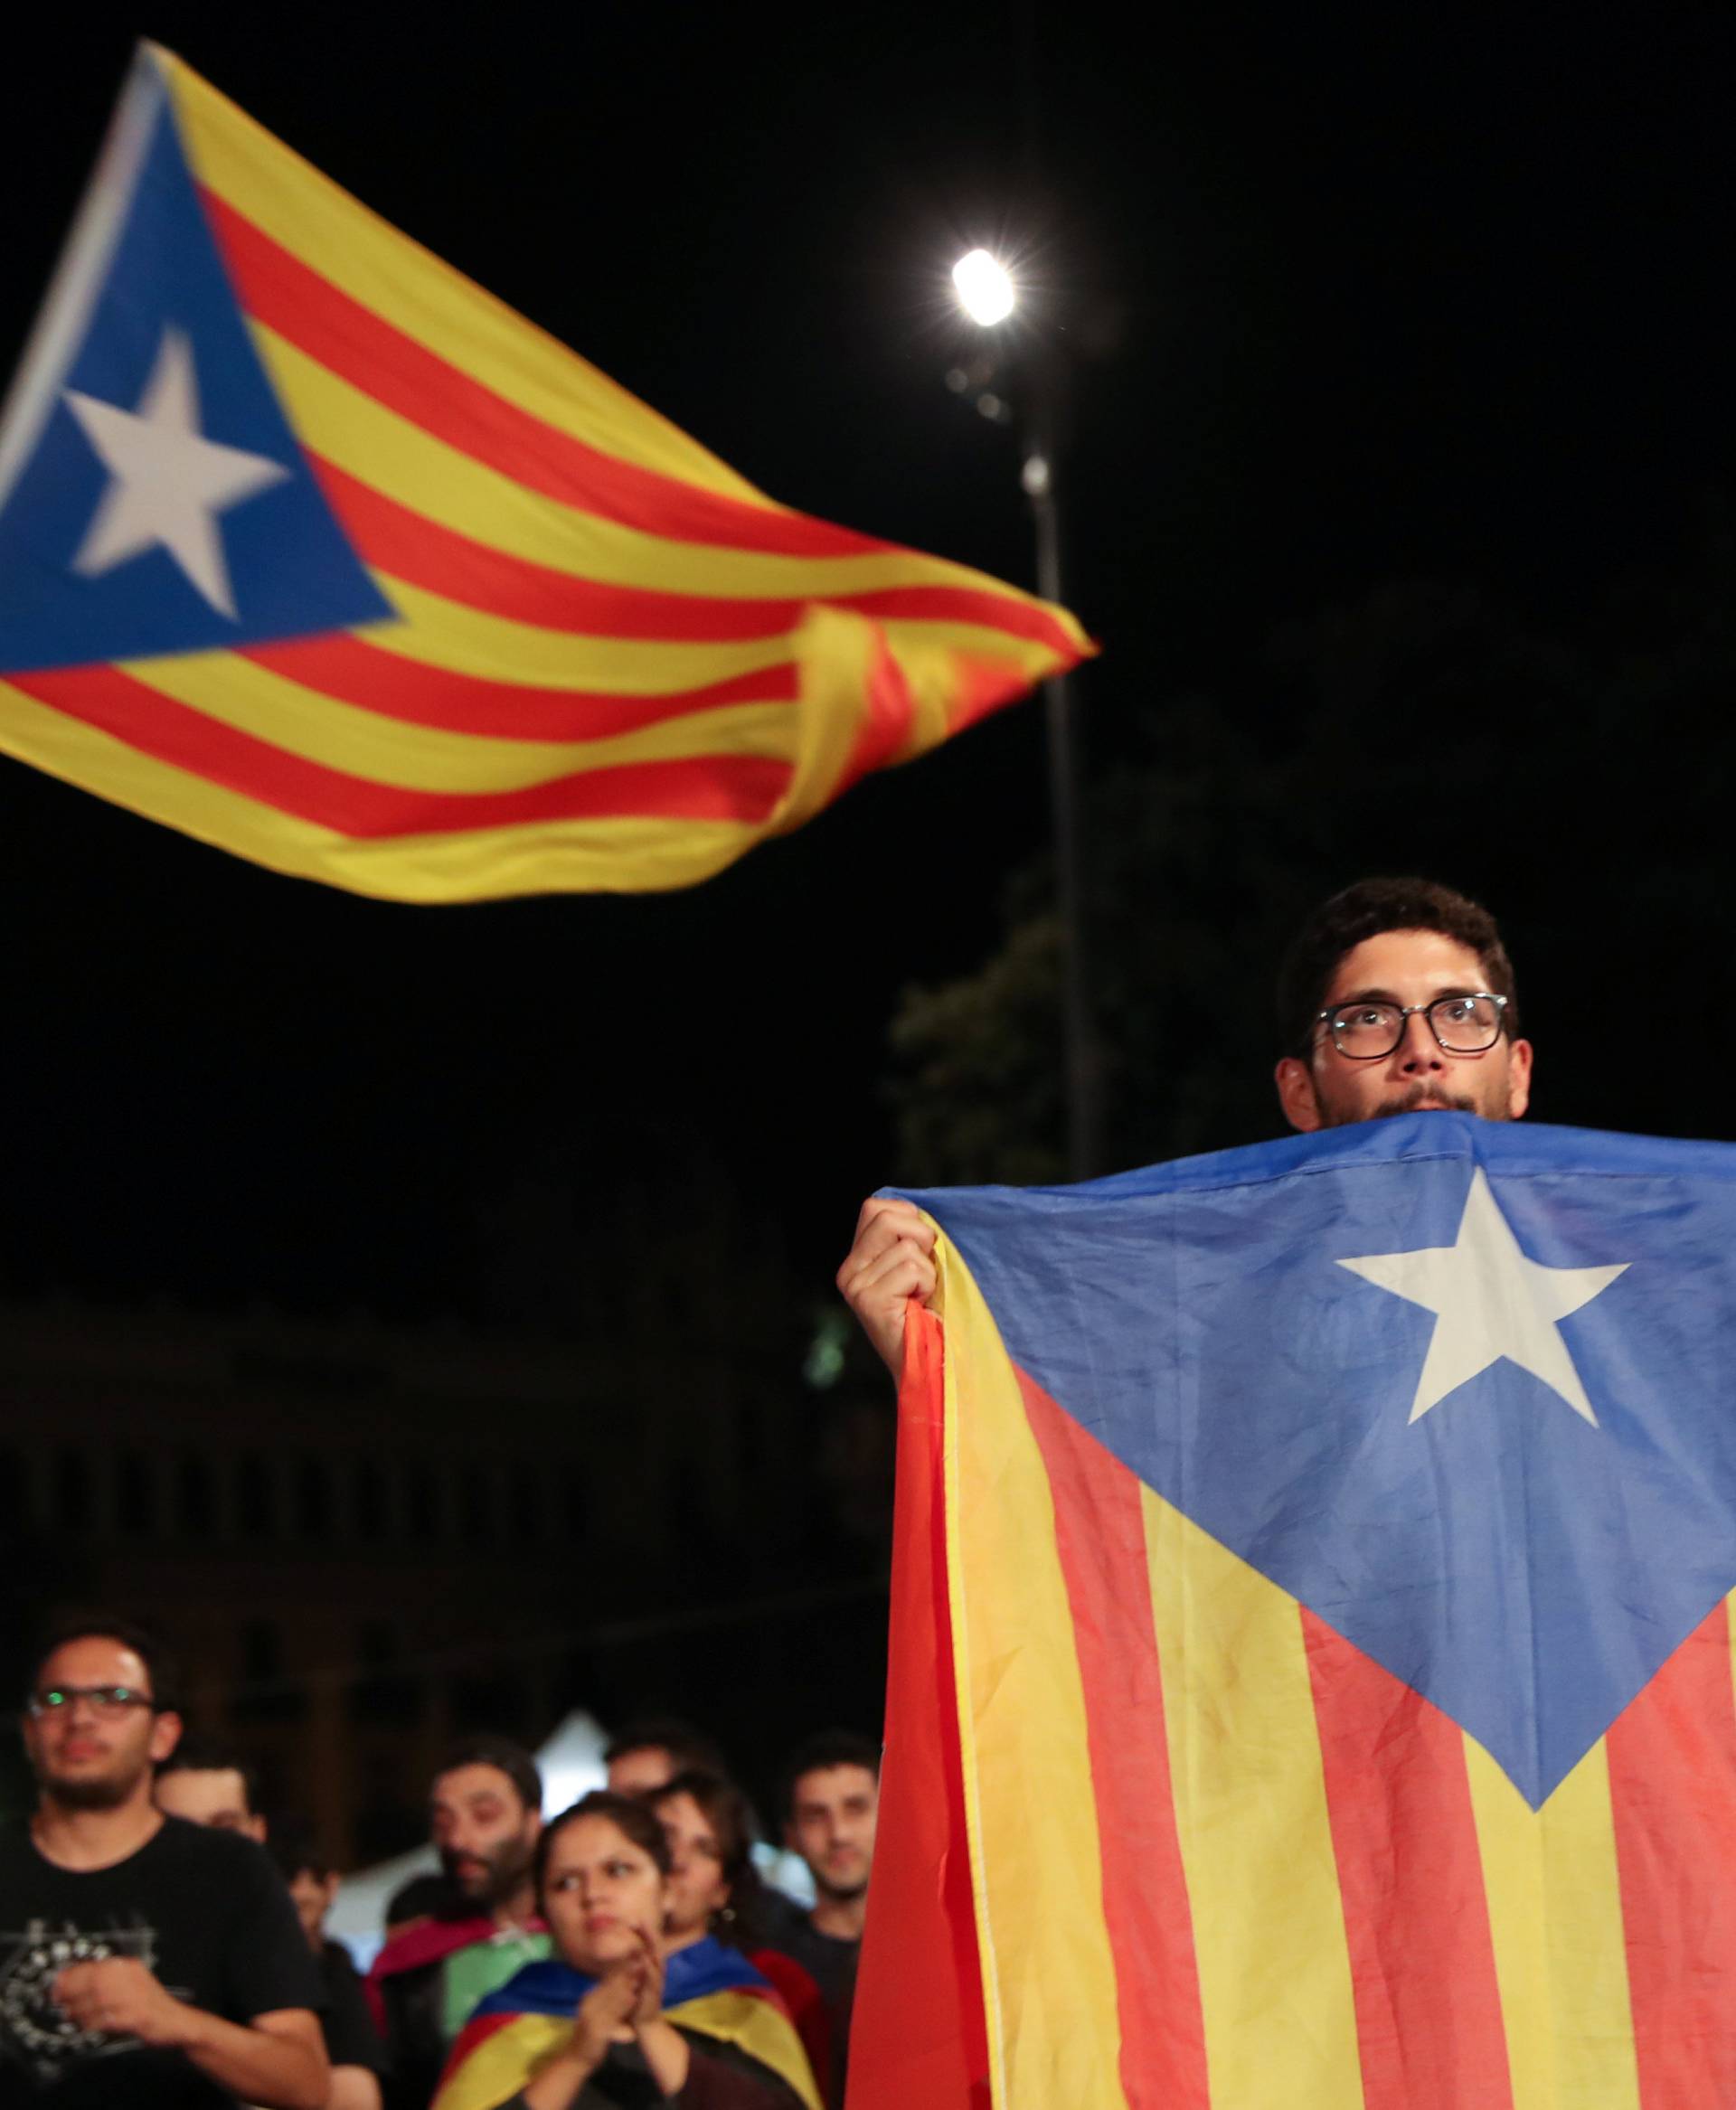 A man holds an Estelada (Catalan separatist flag) as people gather at Plaza Catalunya after voting ended for the banned independence referendum, in Barcelona